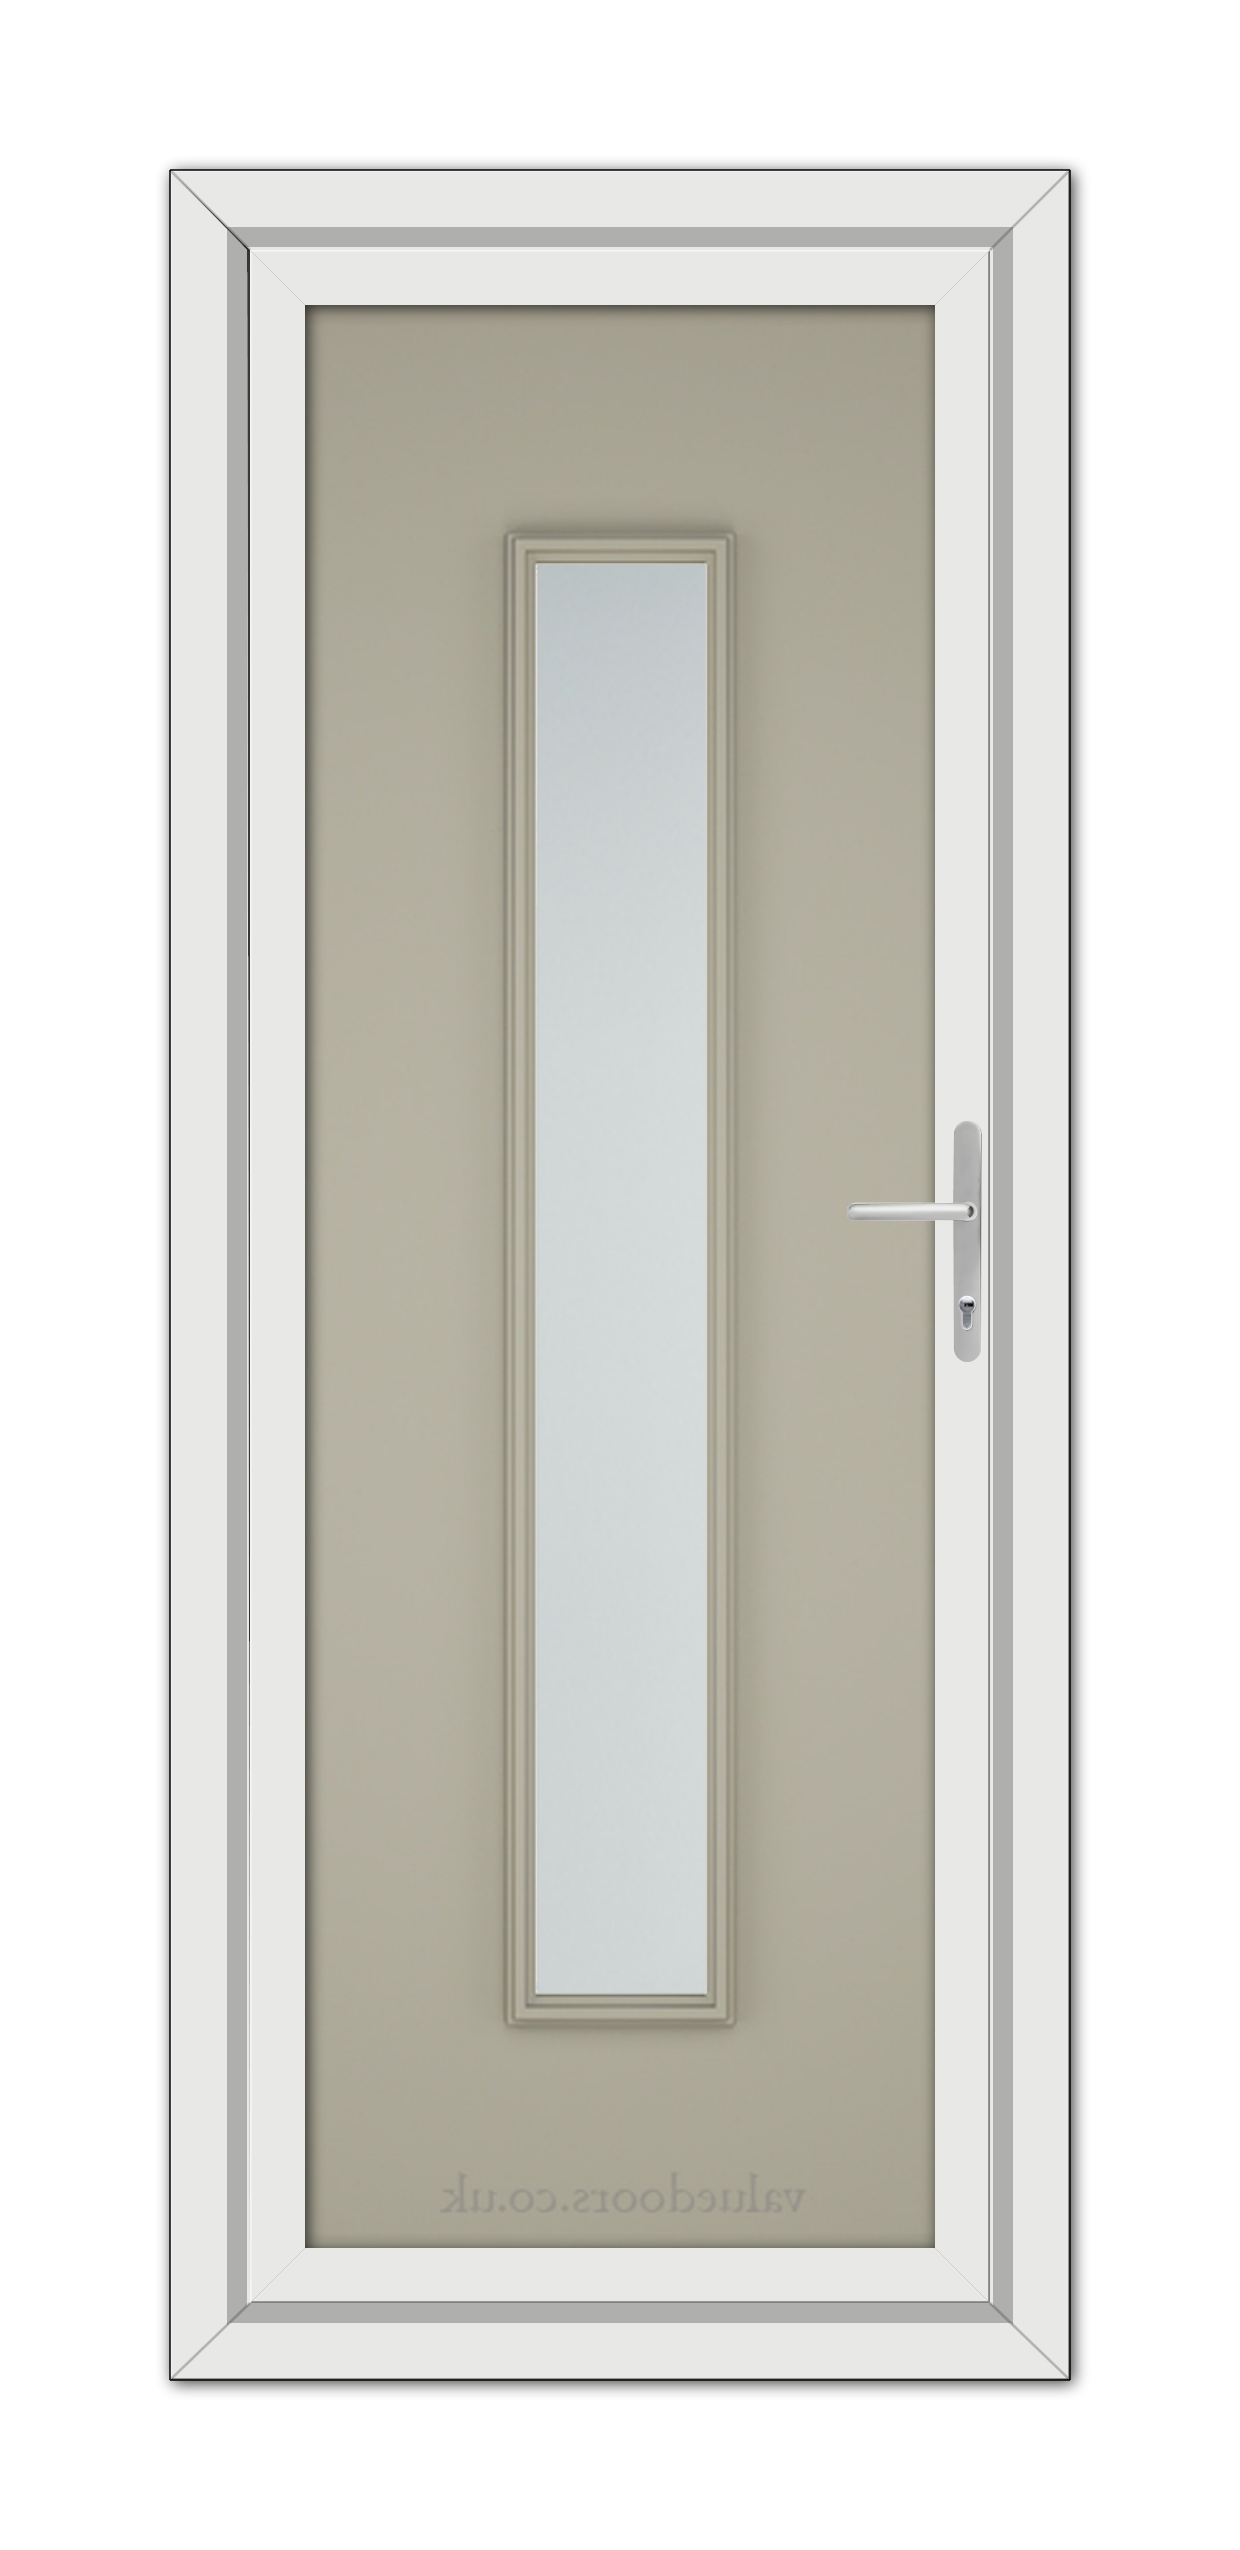 A modern Pebble Grey Rome uPVC Door with a vertical, narrow glass pane and a metallic handle, isolated on a white background.